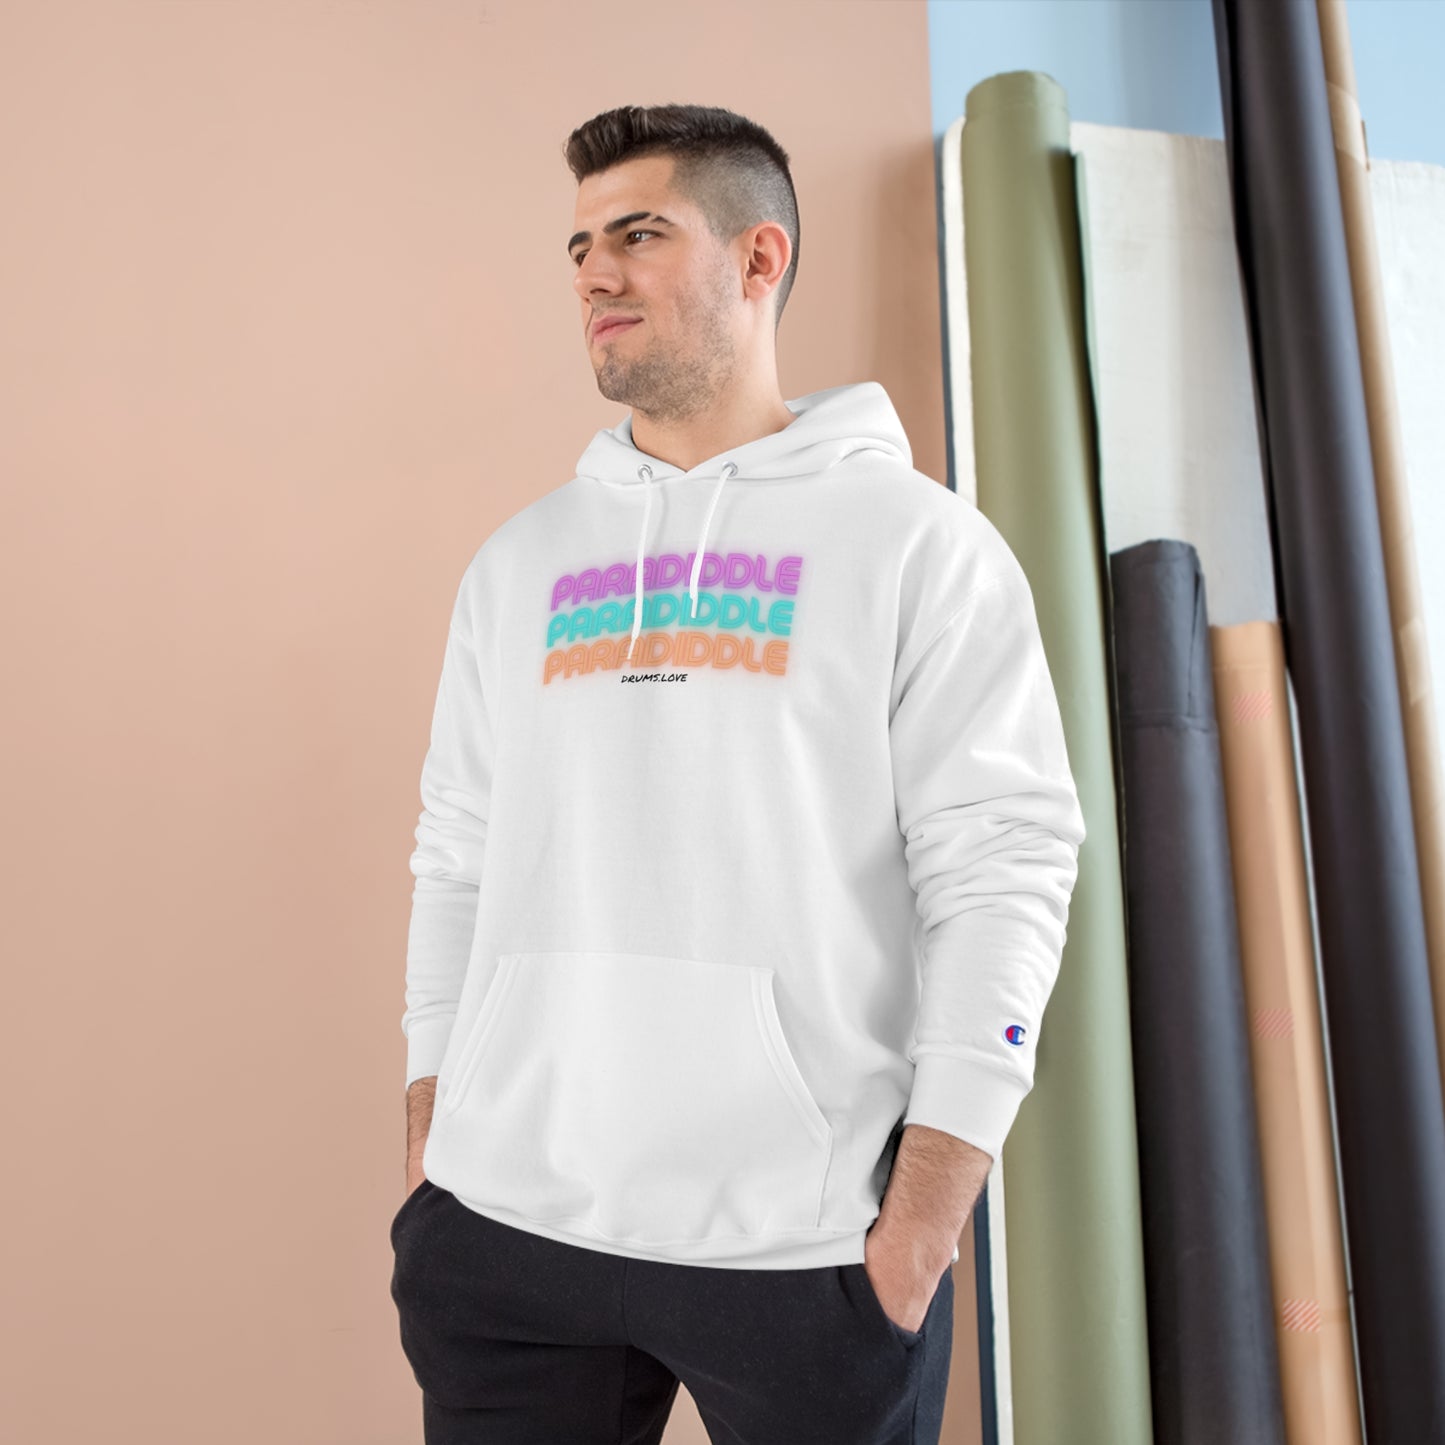 PARADIDDLE Champion Hoodie